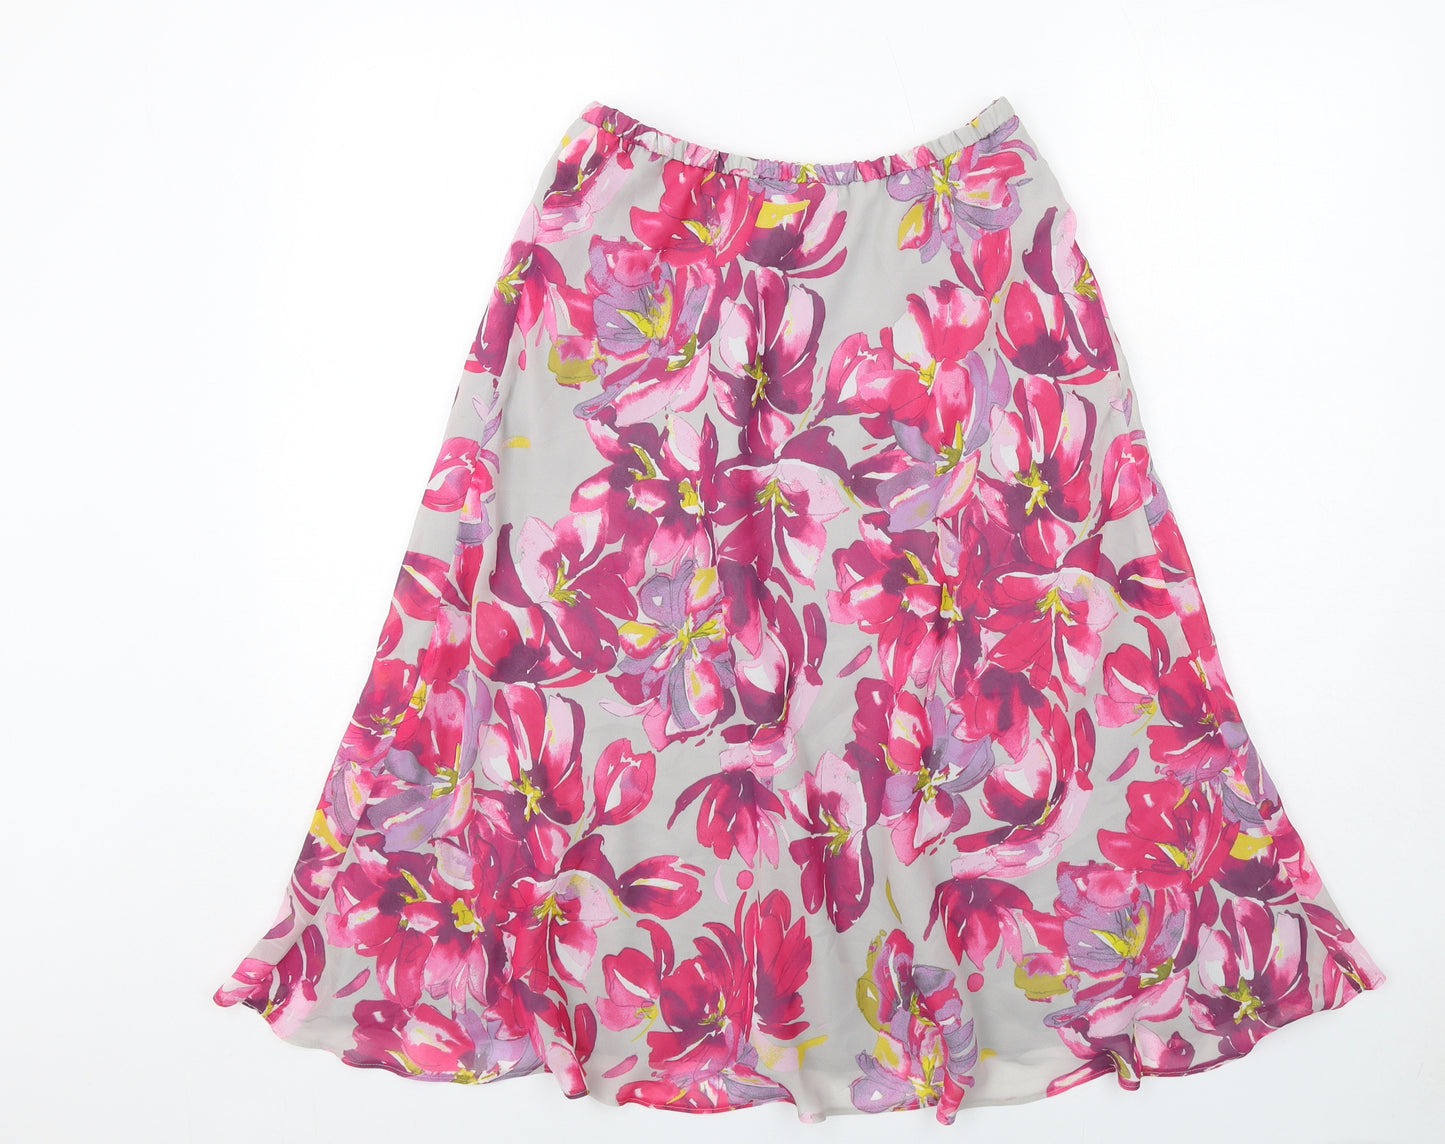 Eastex Womens Pink Floral Polyester Swing Skirt Size 10